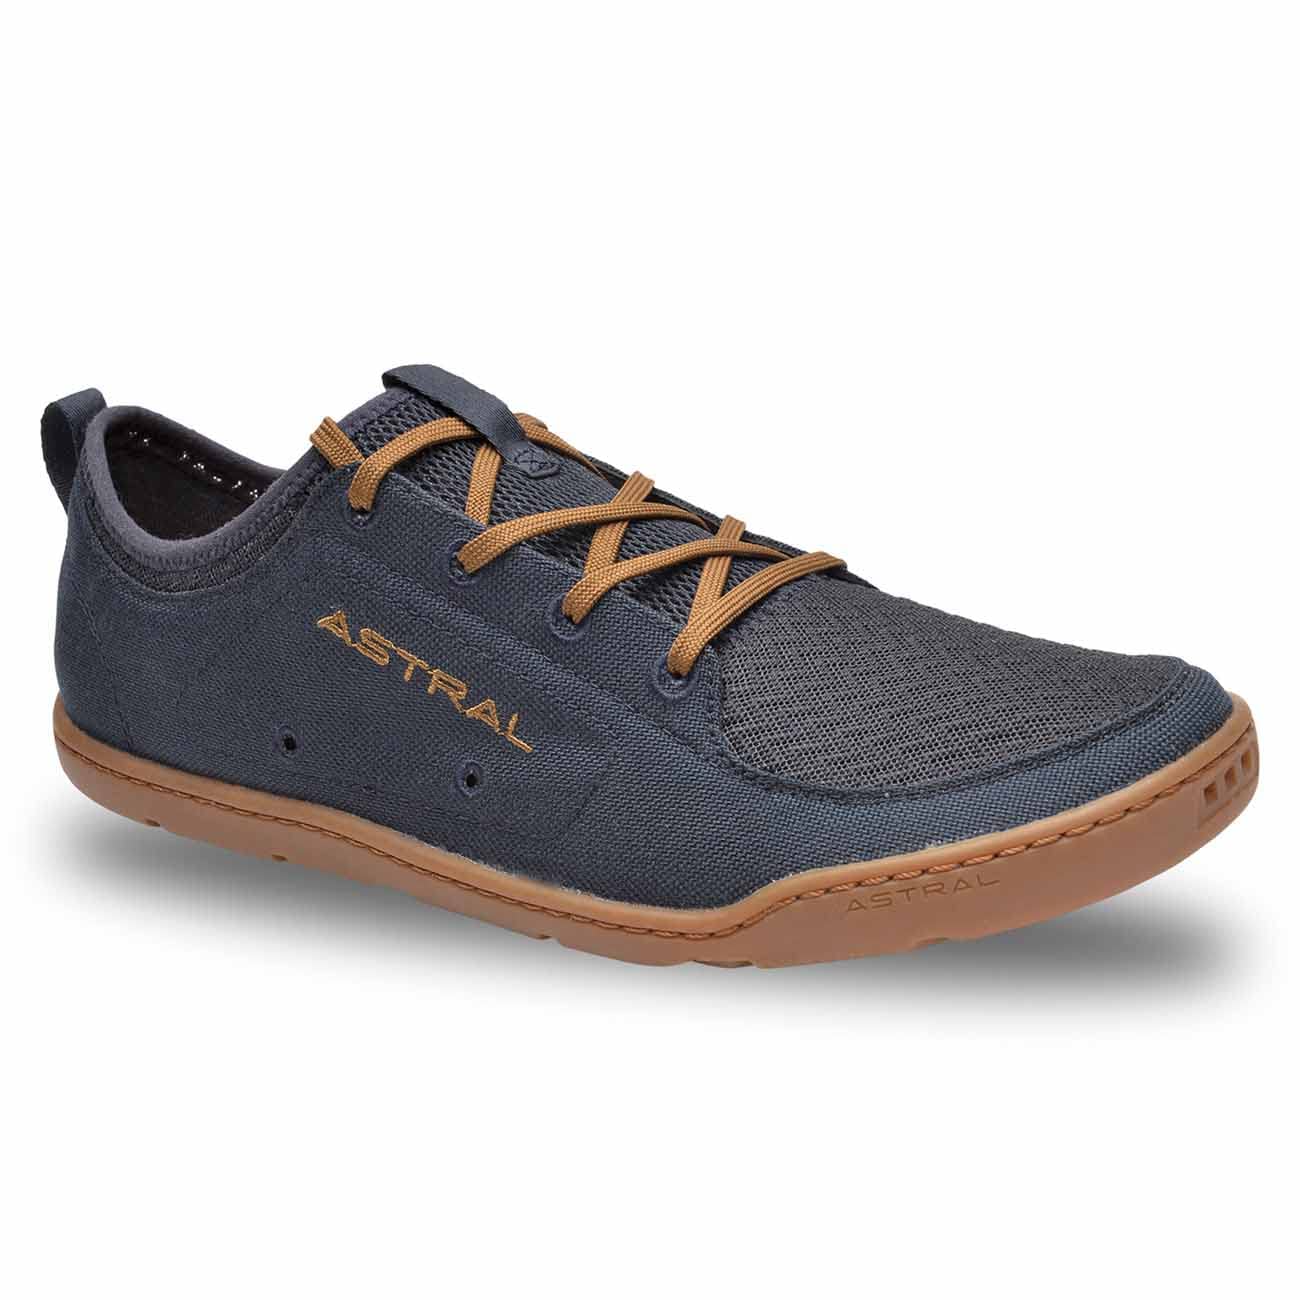 Astral Men's Water Shoes